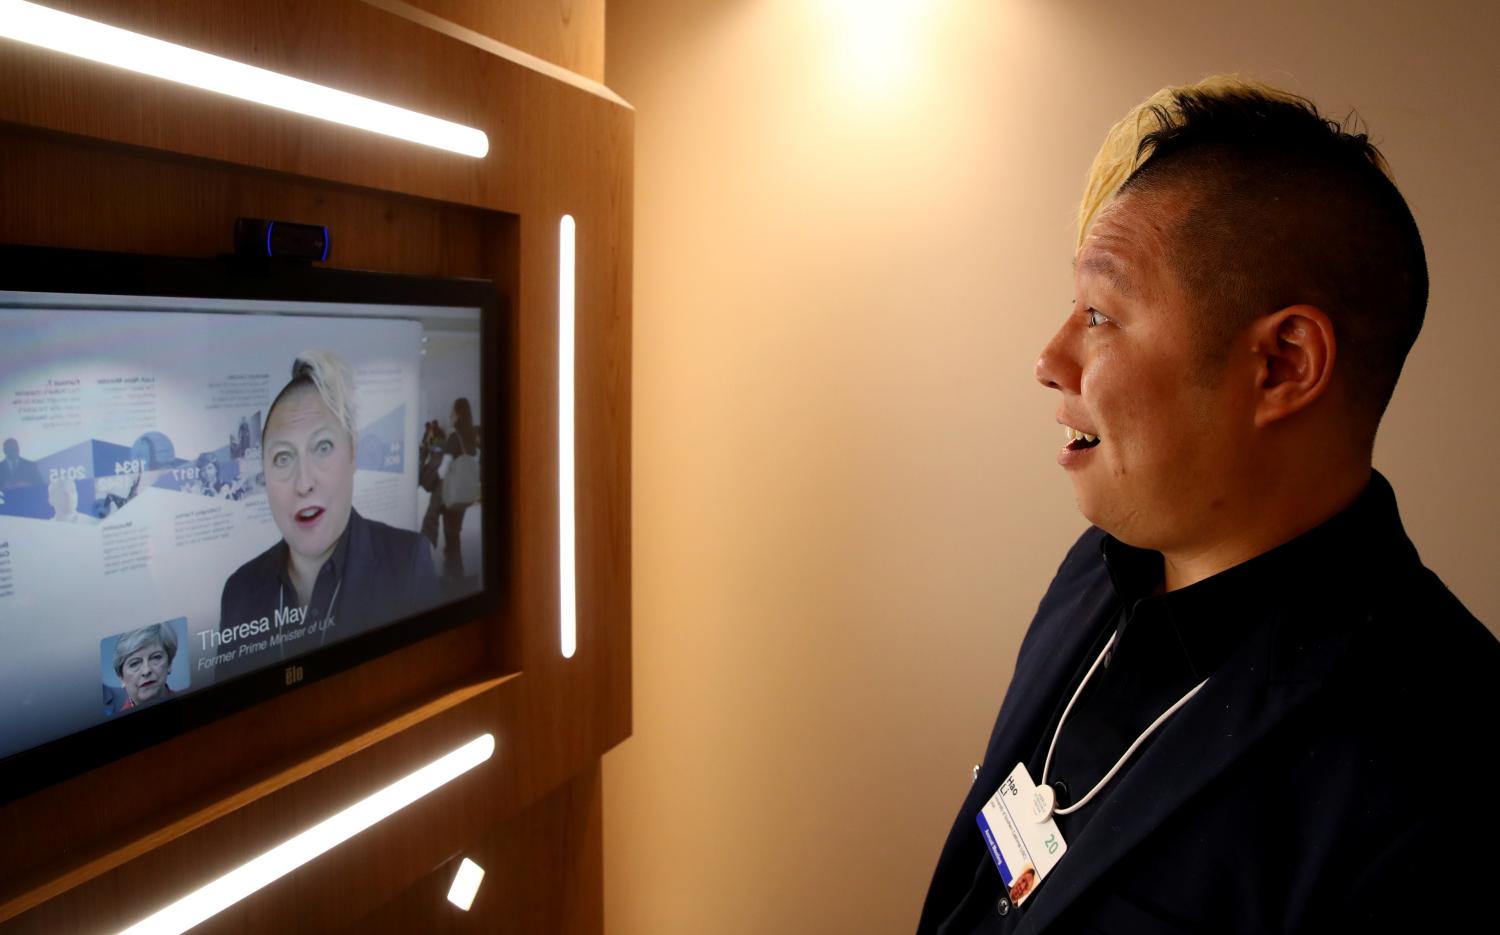 Associate professor of computer science at the University of Southern California Hao Li showcases a 'deepfake' video with Britain's former Prime Minister Theresa May during the 50th World Economic Forum (WEF) annual meeting in Davos, Switzerland, January 22, 2020. REUTERS/Denis Balibouse